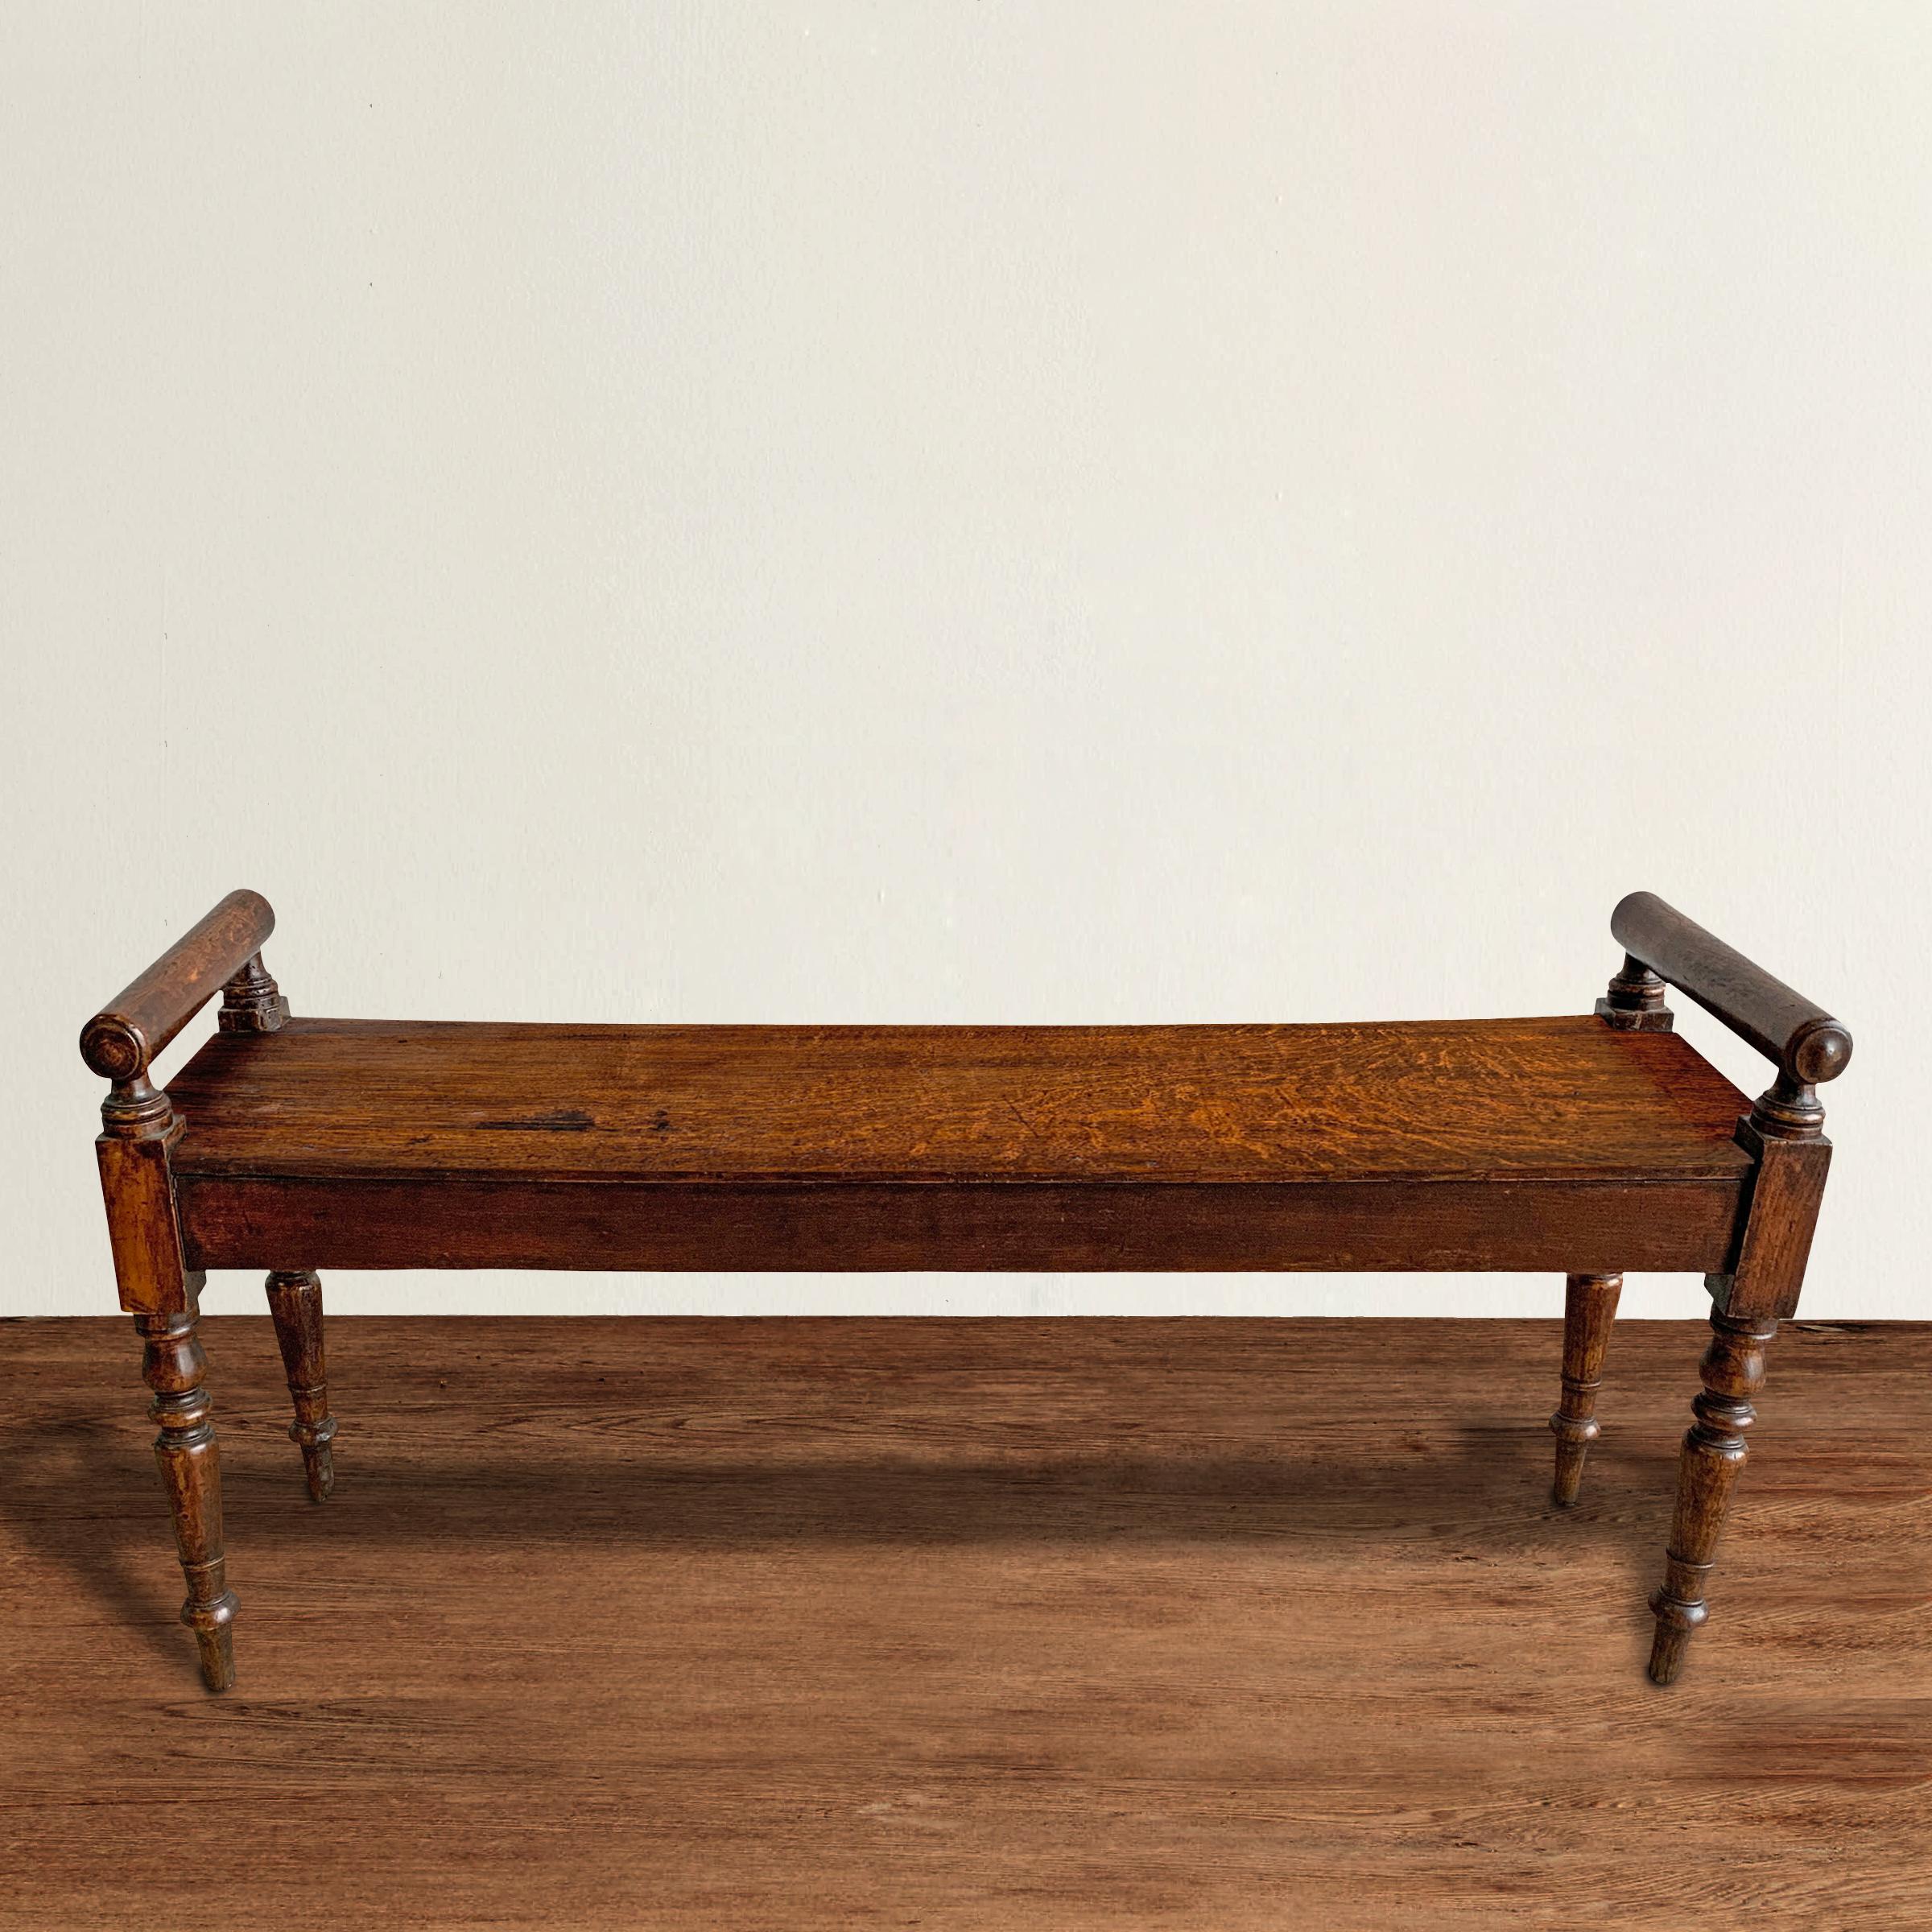 A steadfast and faithful 19th century English oak hall bench with rolling-pin turned sides, and beautifully turned and tapered legs, retaining its original patinated finish only one hundred and fifty years can bestow.